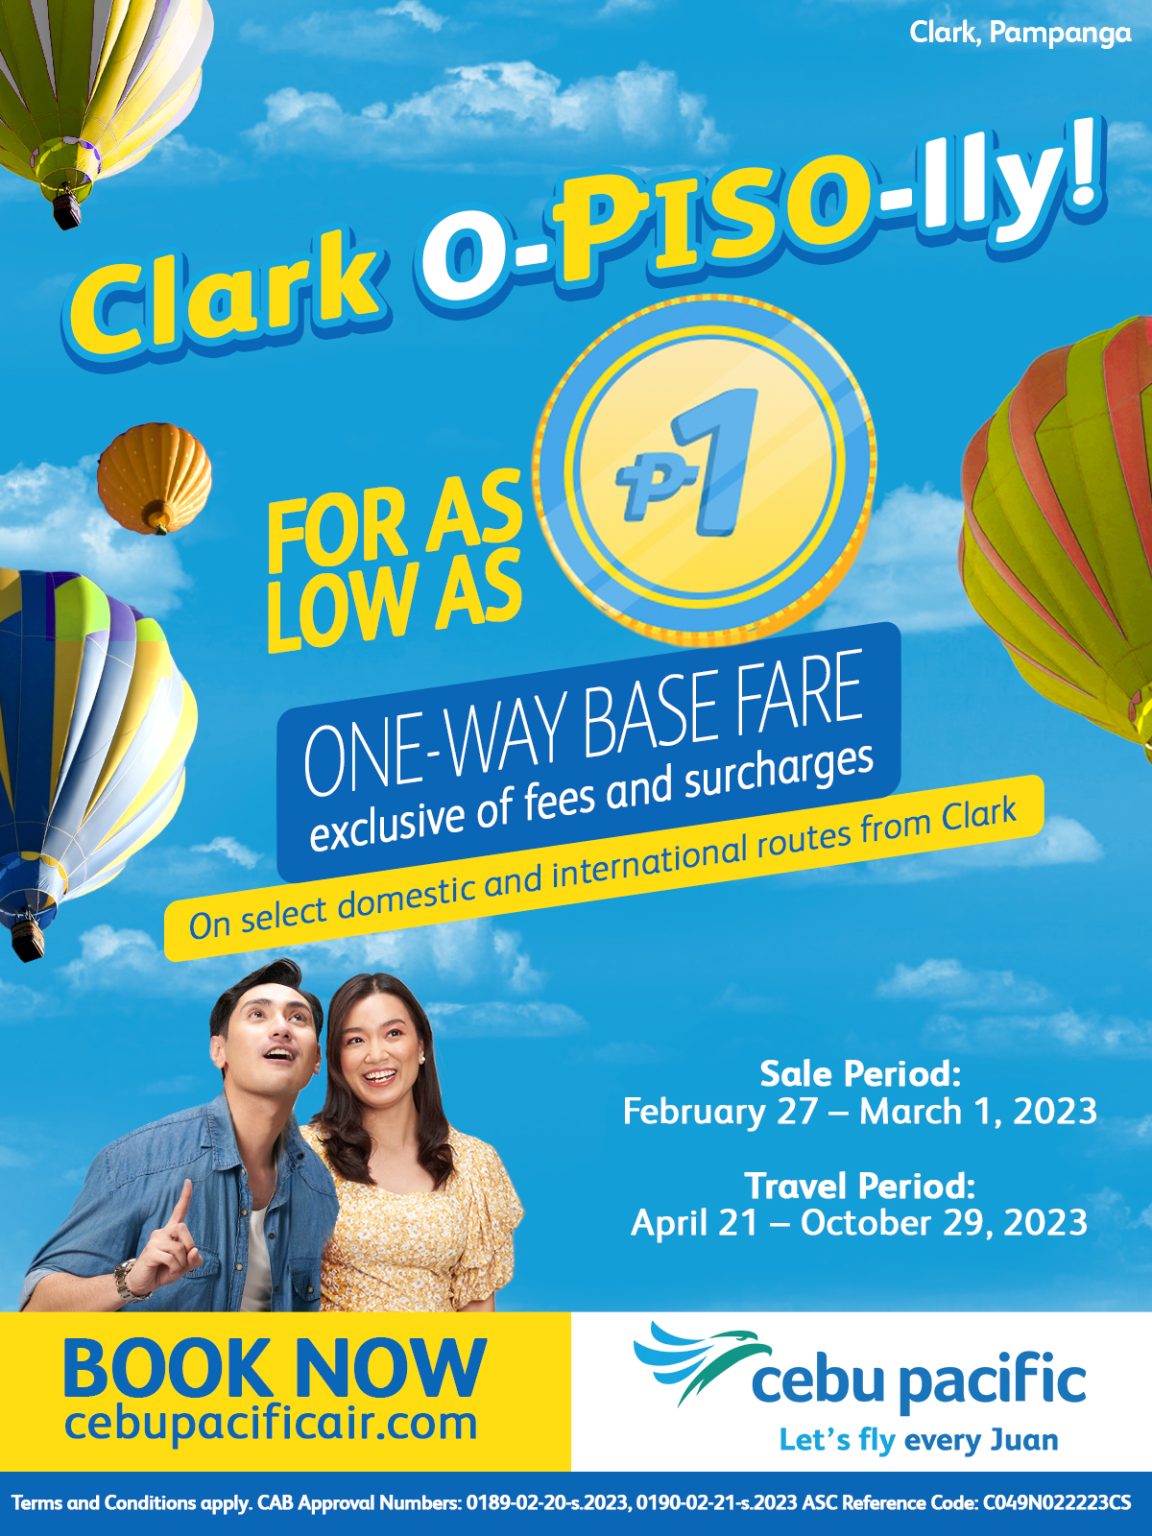 Cebu Pacific Seat Sale Book Flights from Clark for as low as Php1 one